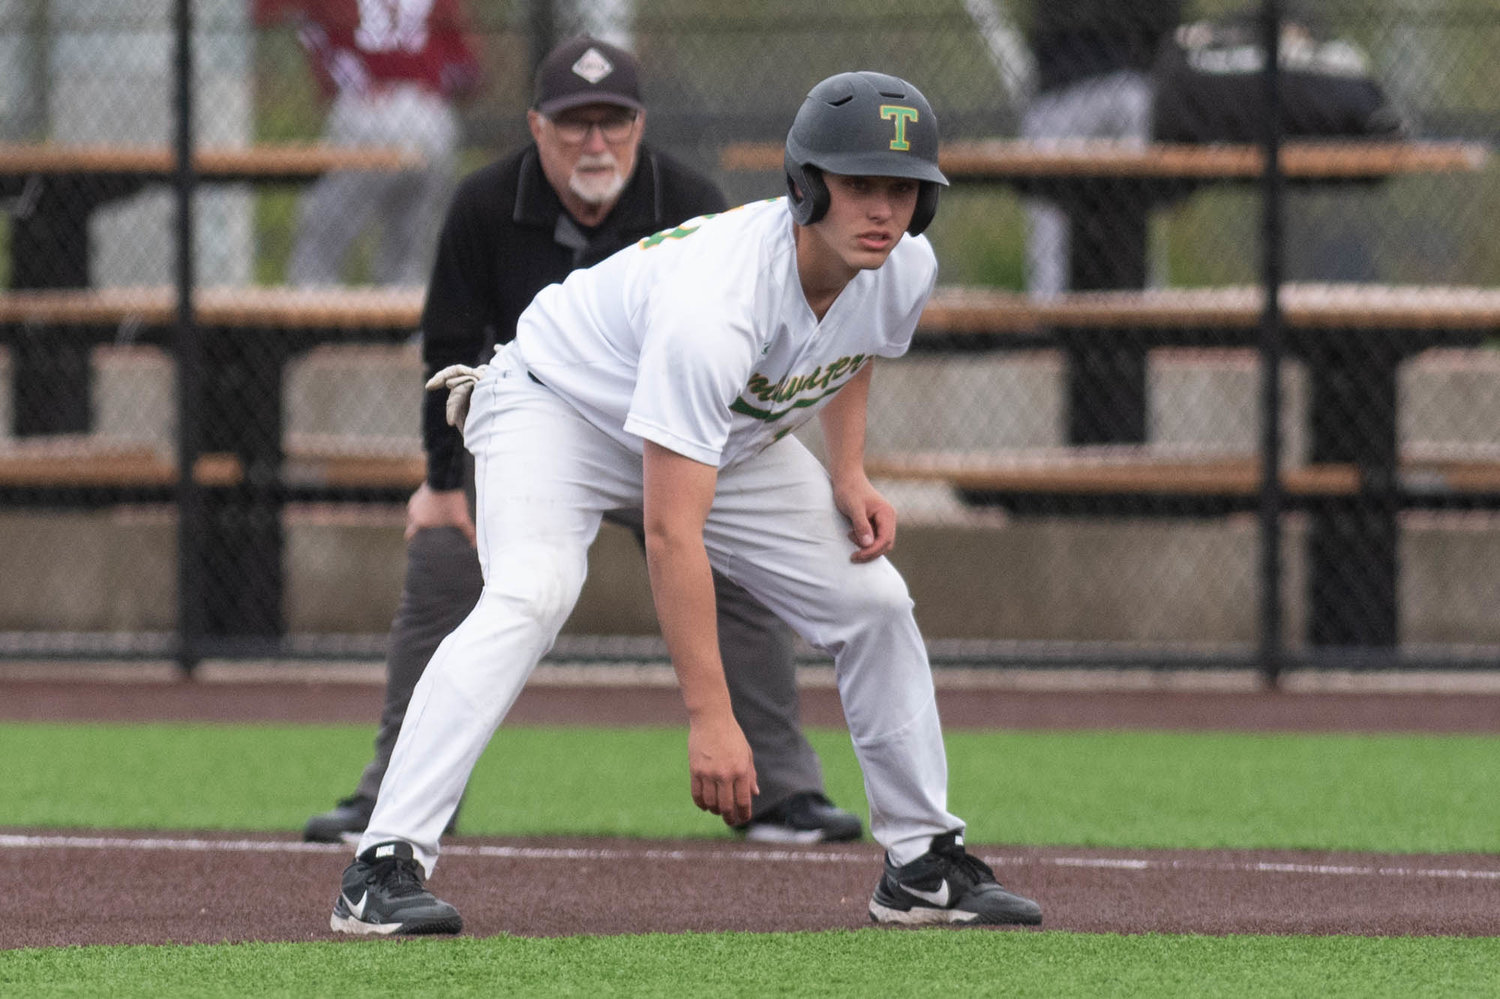 Tumwater's Ryan Orr eyes the Shelton pitcher in the 2A District 4 semifinals at Ridgefield May 11.